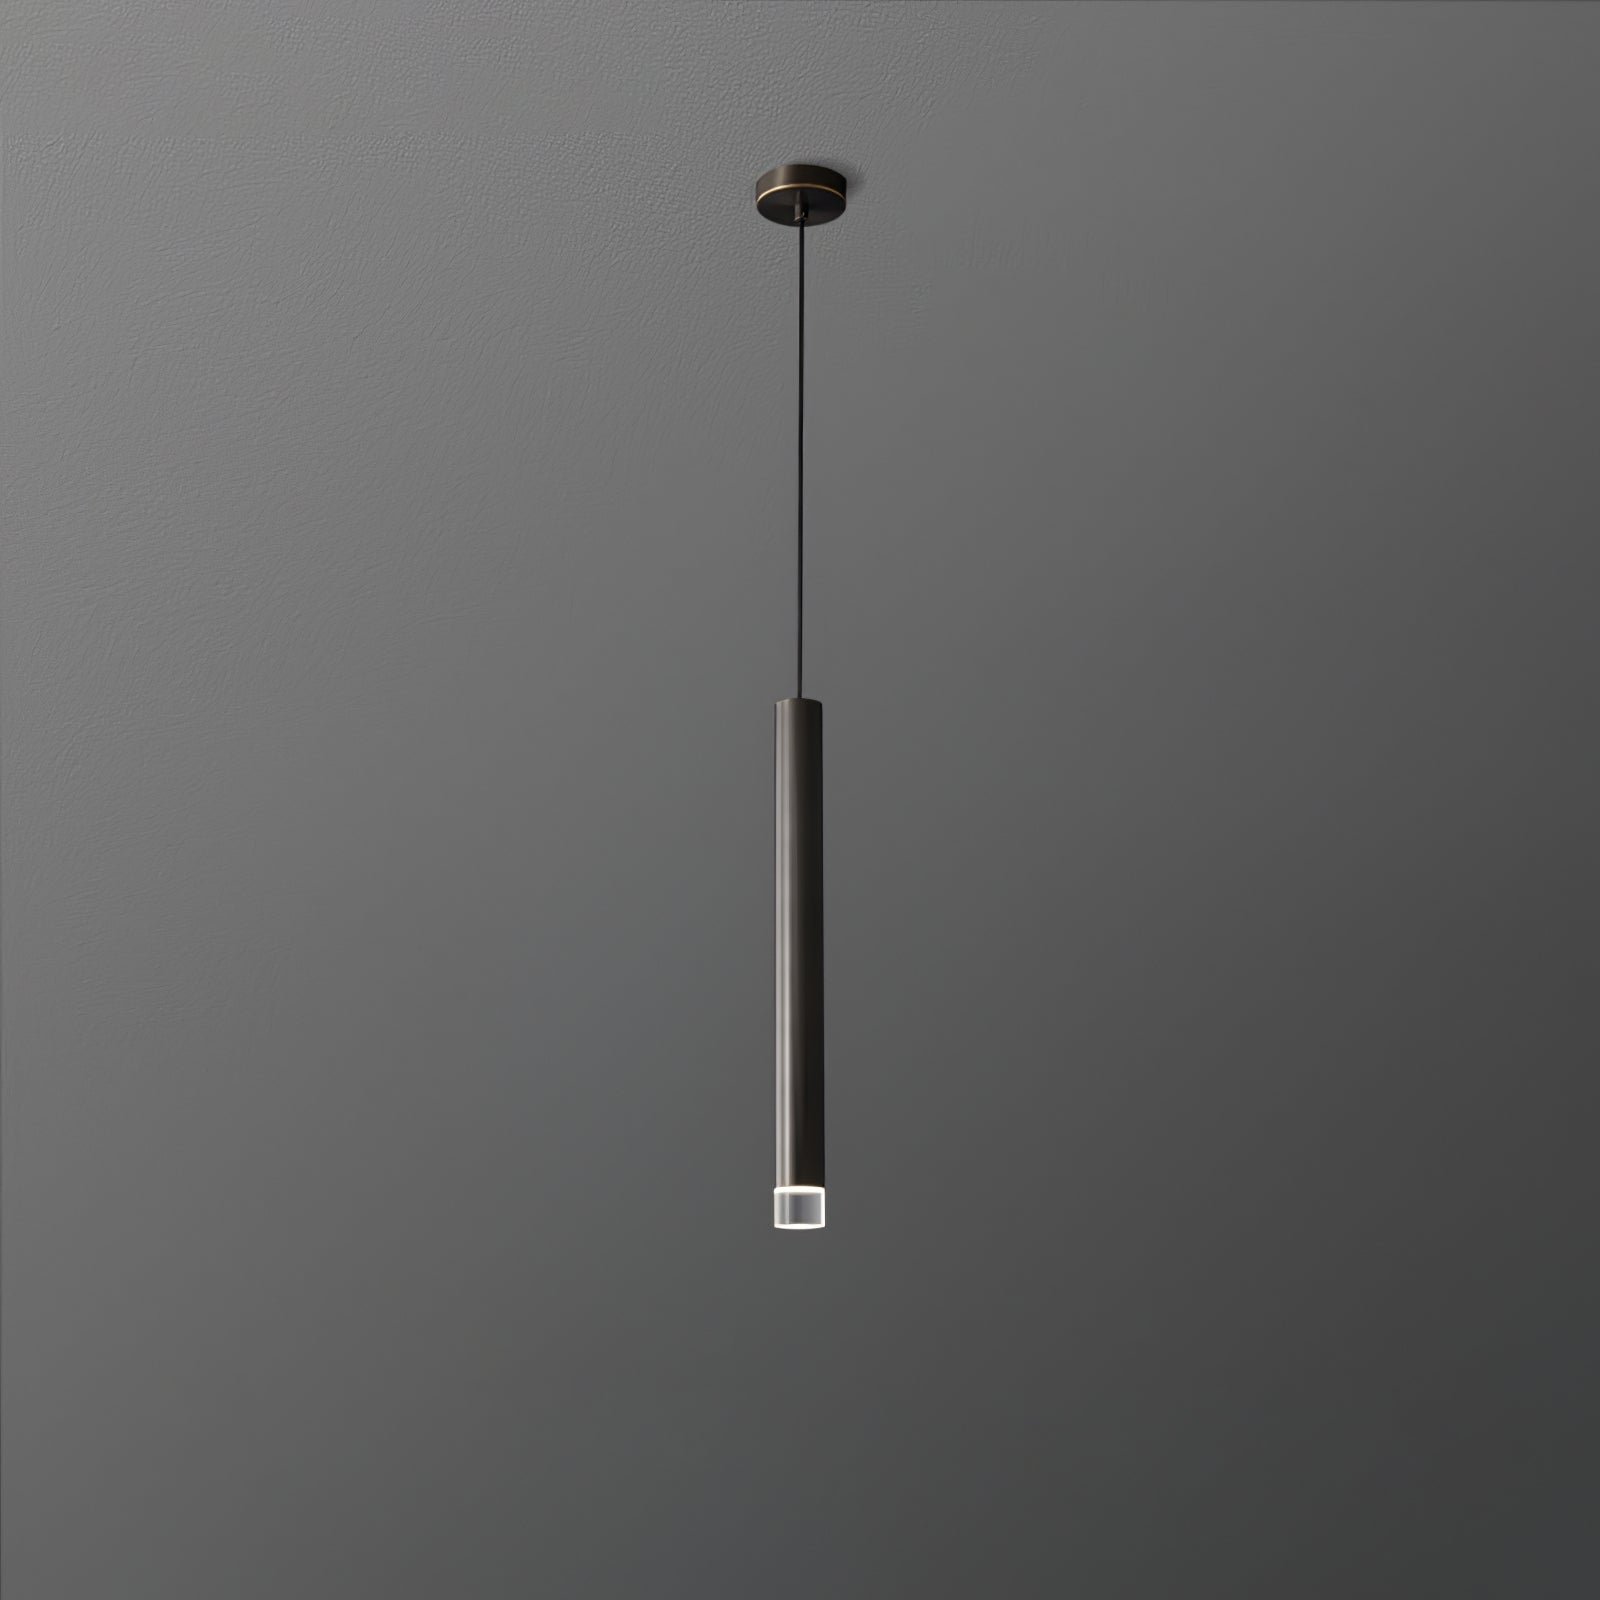 Black Pendant Lamp with 1 Head, Candles-inspired Design, Dimensions: ∅ 1.6″ x H 15.7″ (4cm x H 40cm)